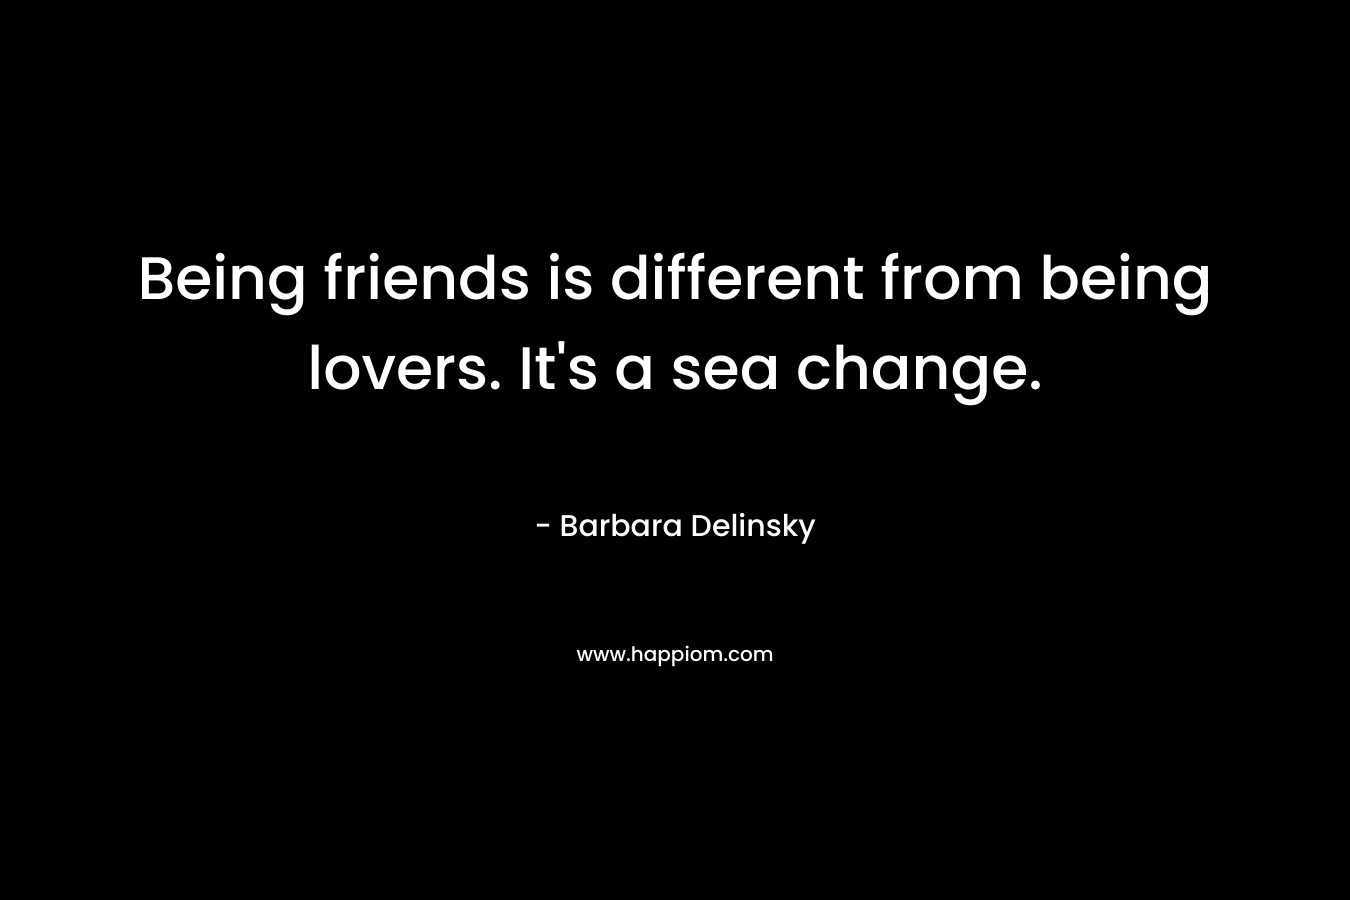 Being friends is different from being lovers. It’s a sea change. – Barbara Delinsky